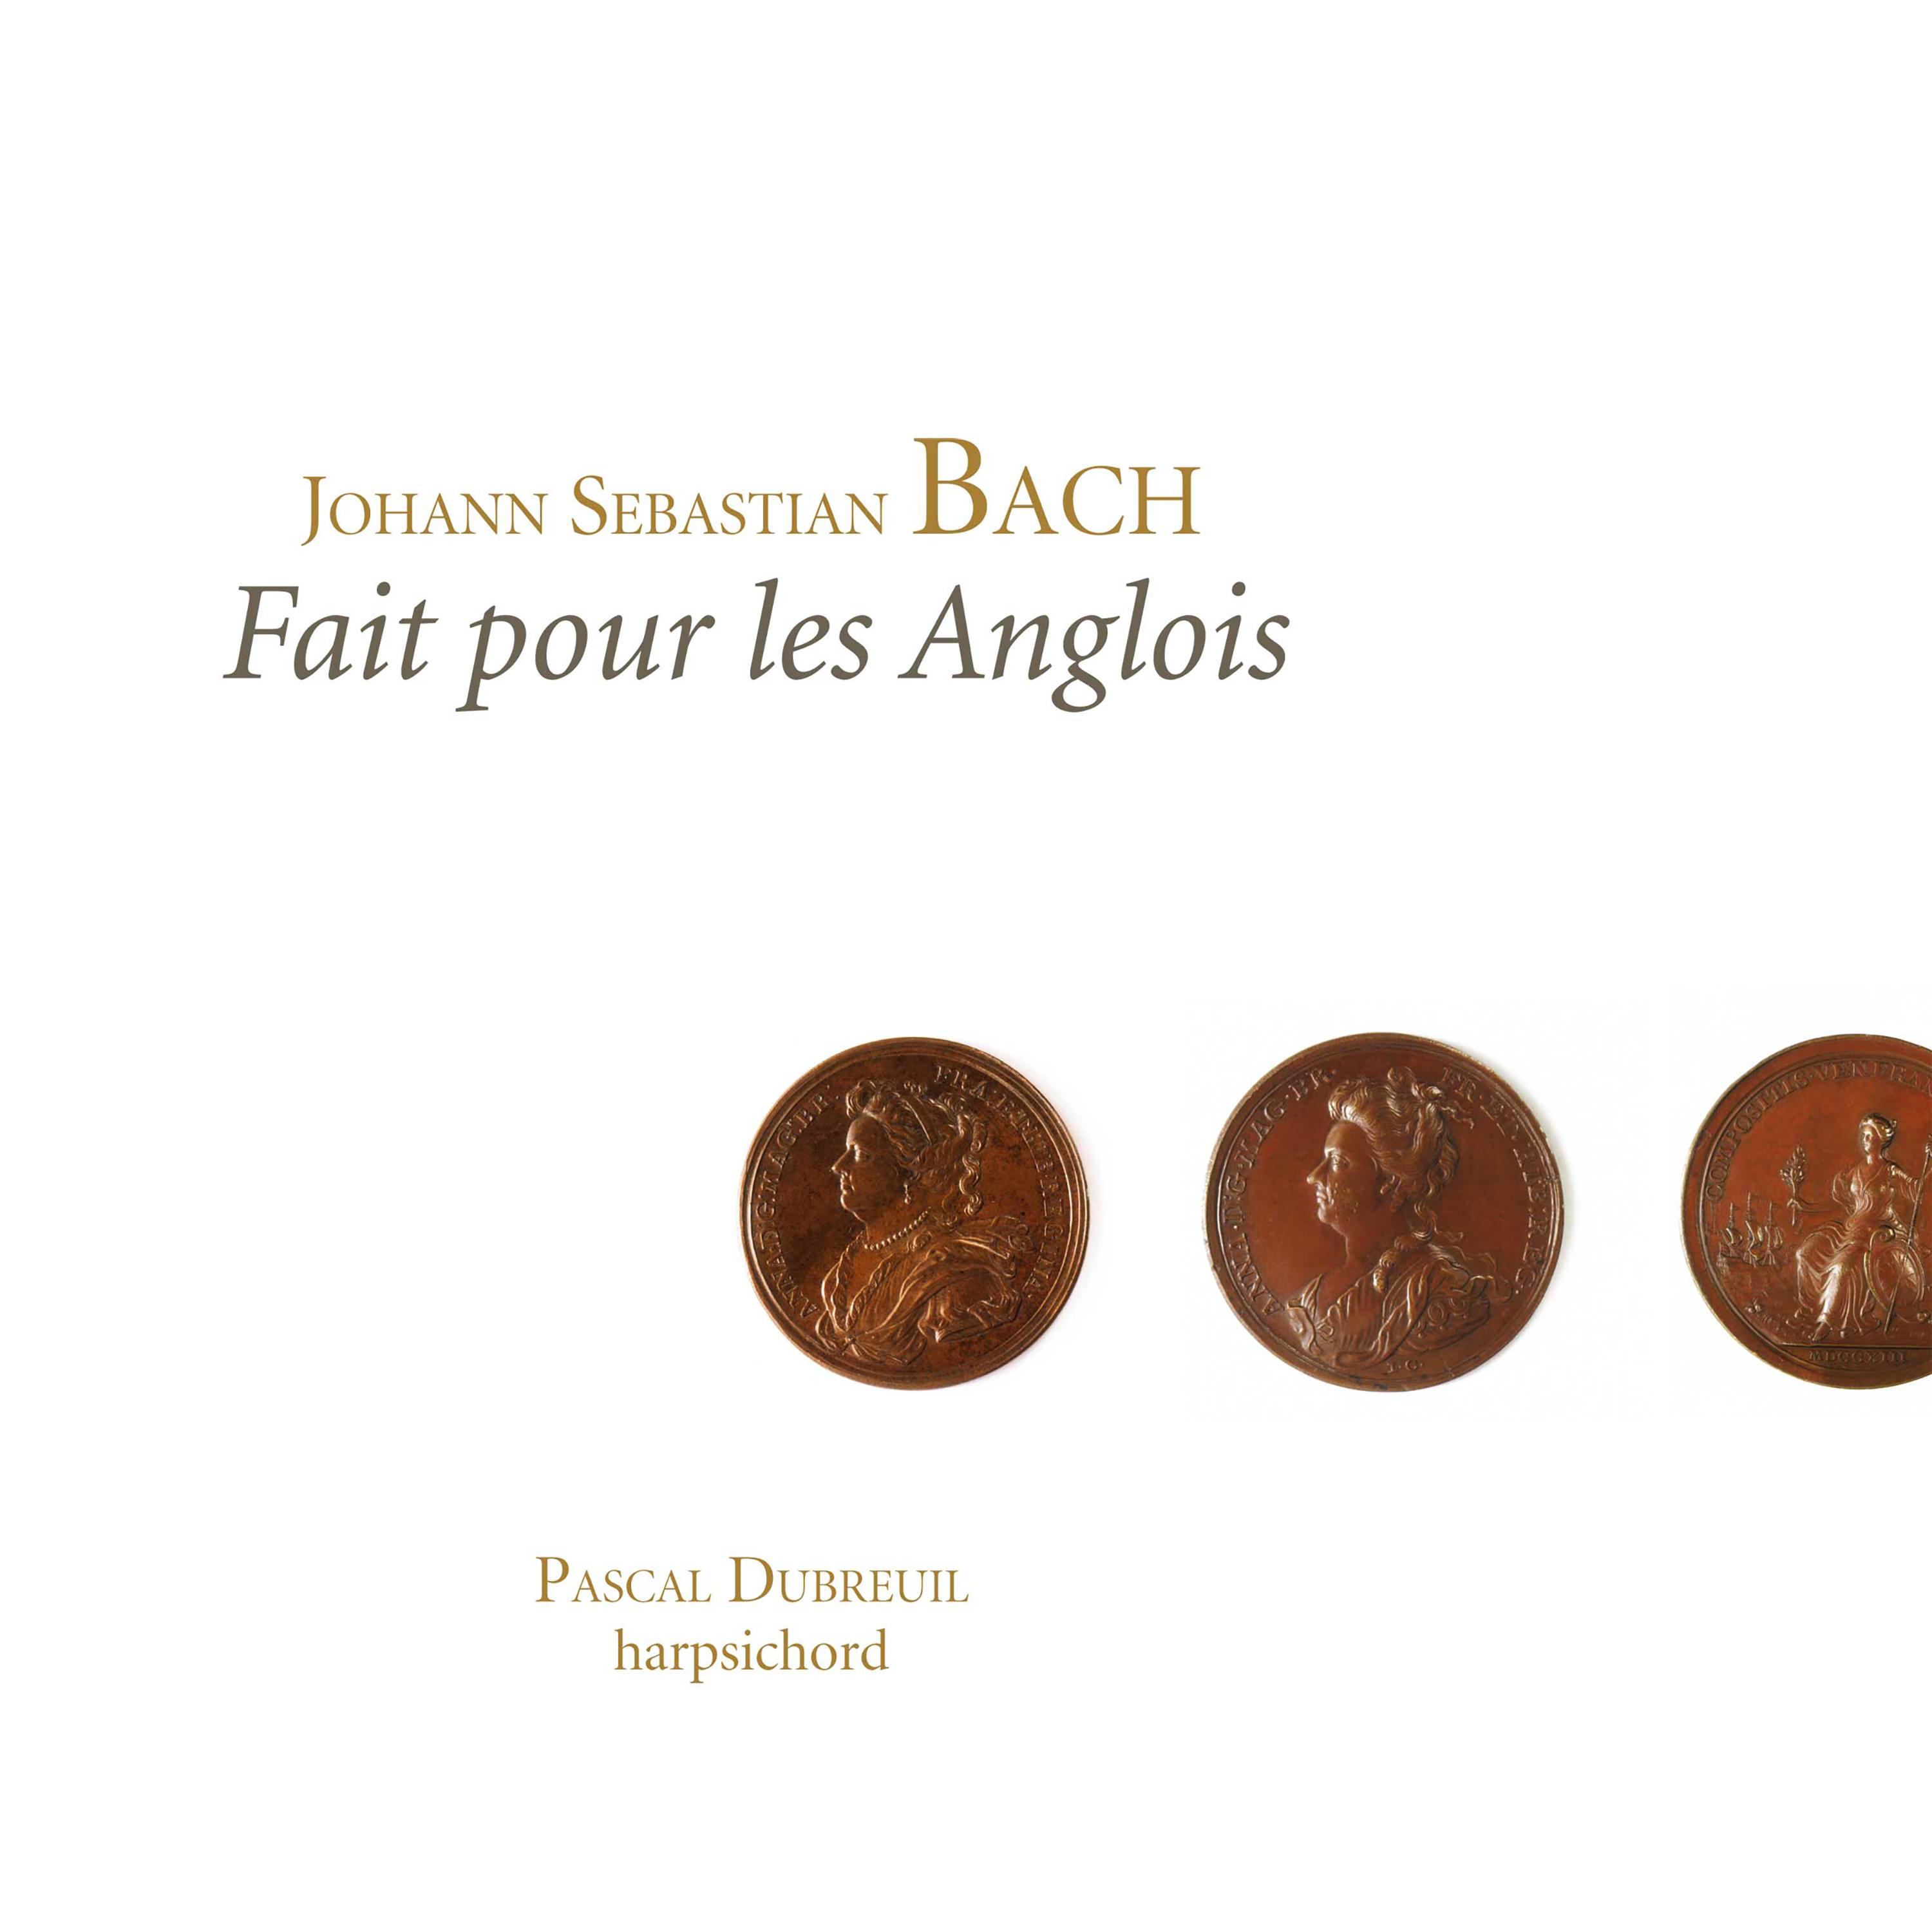 Pascal Dubreuil - Suite III in G Minor, BWV 808: V. Gavotte I & II